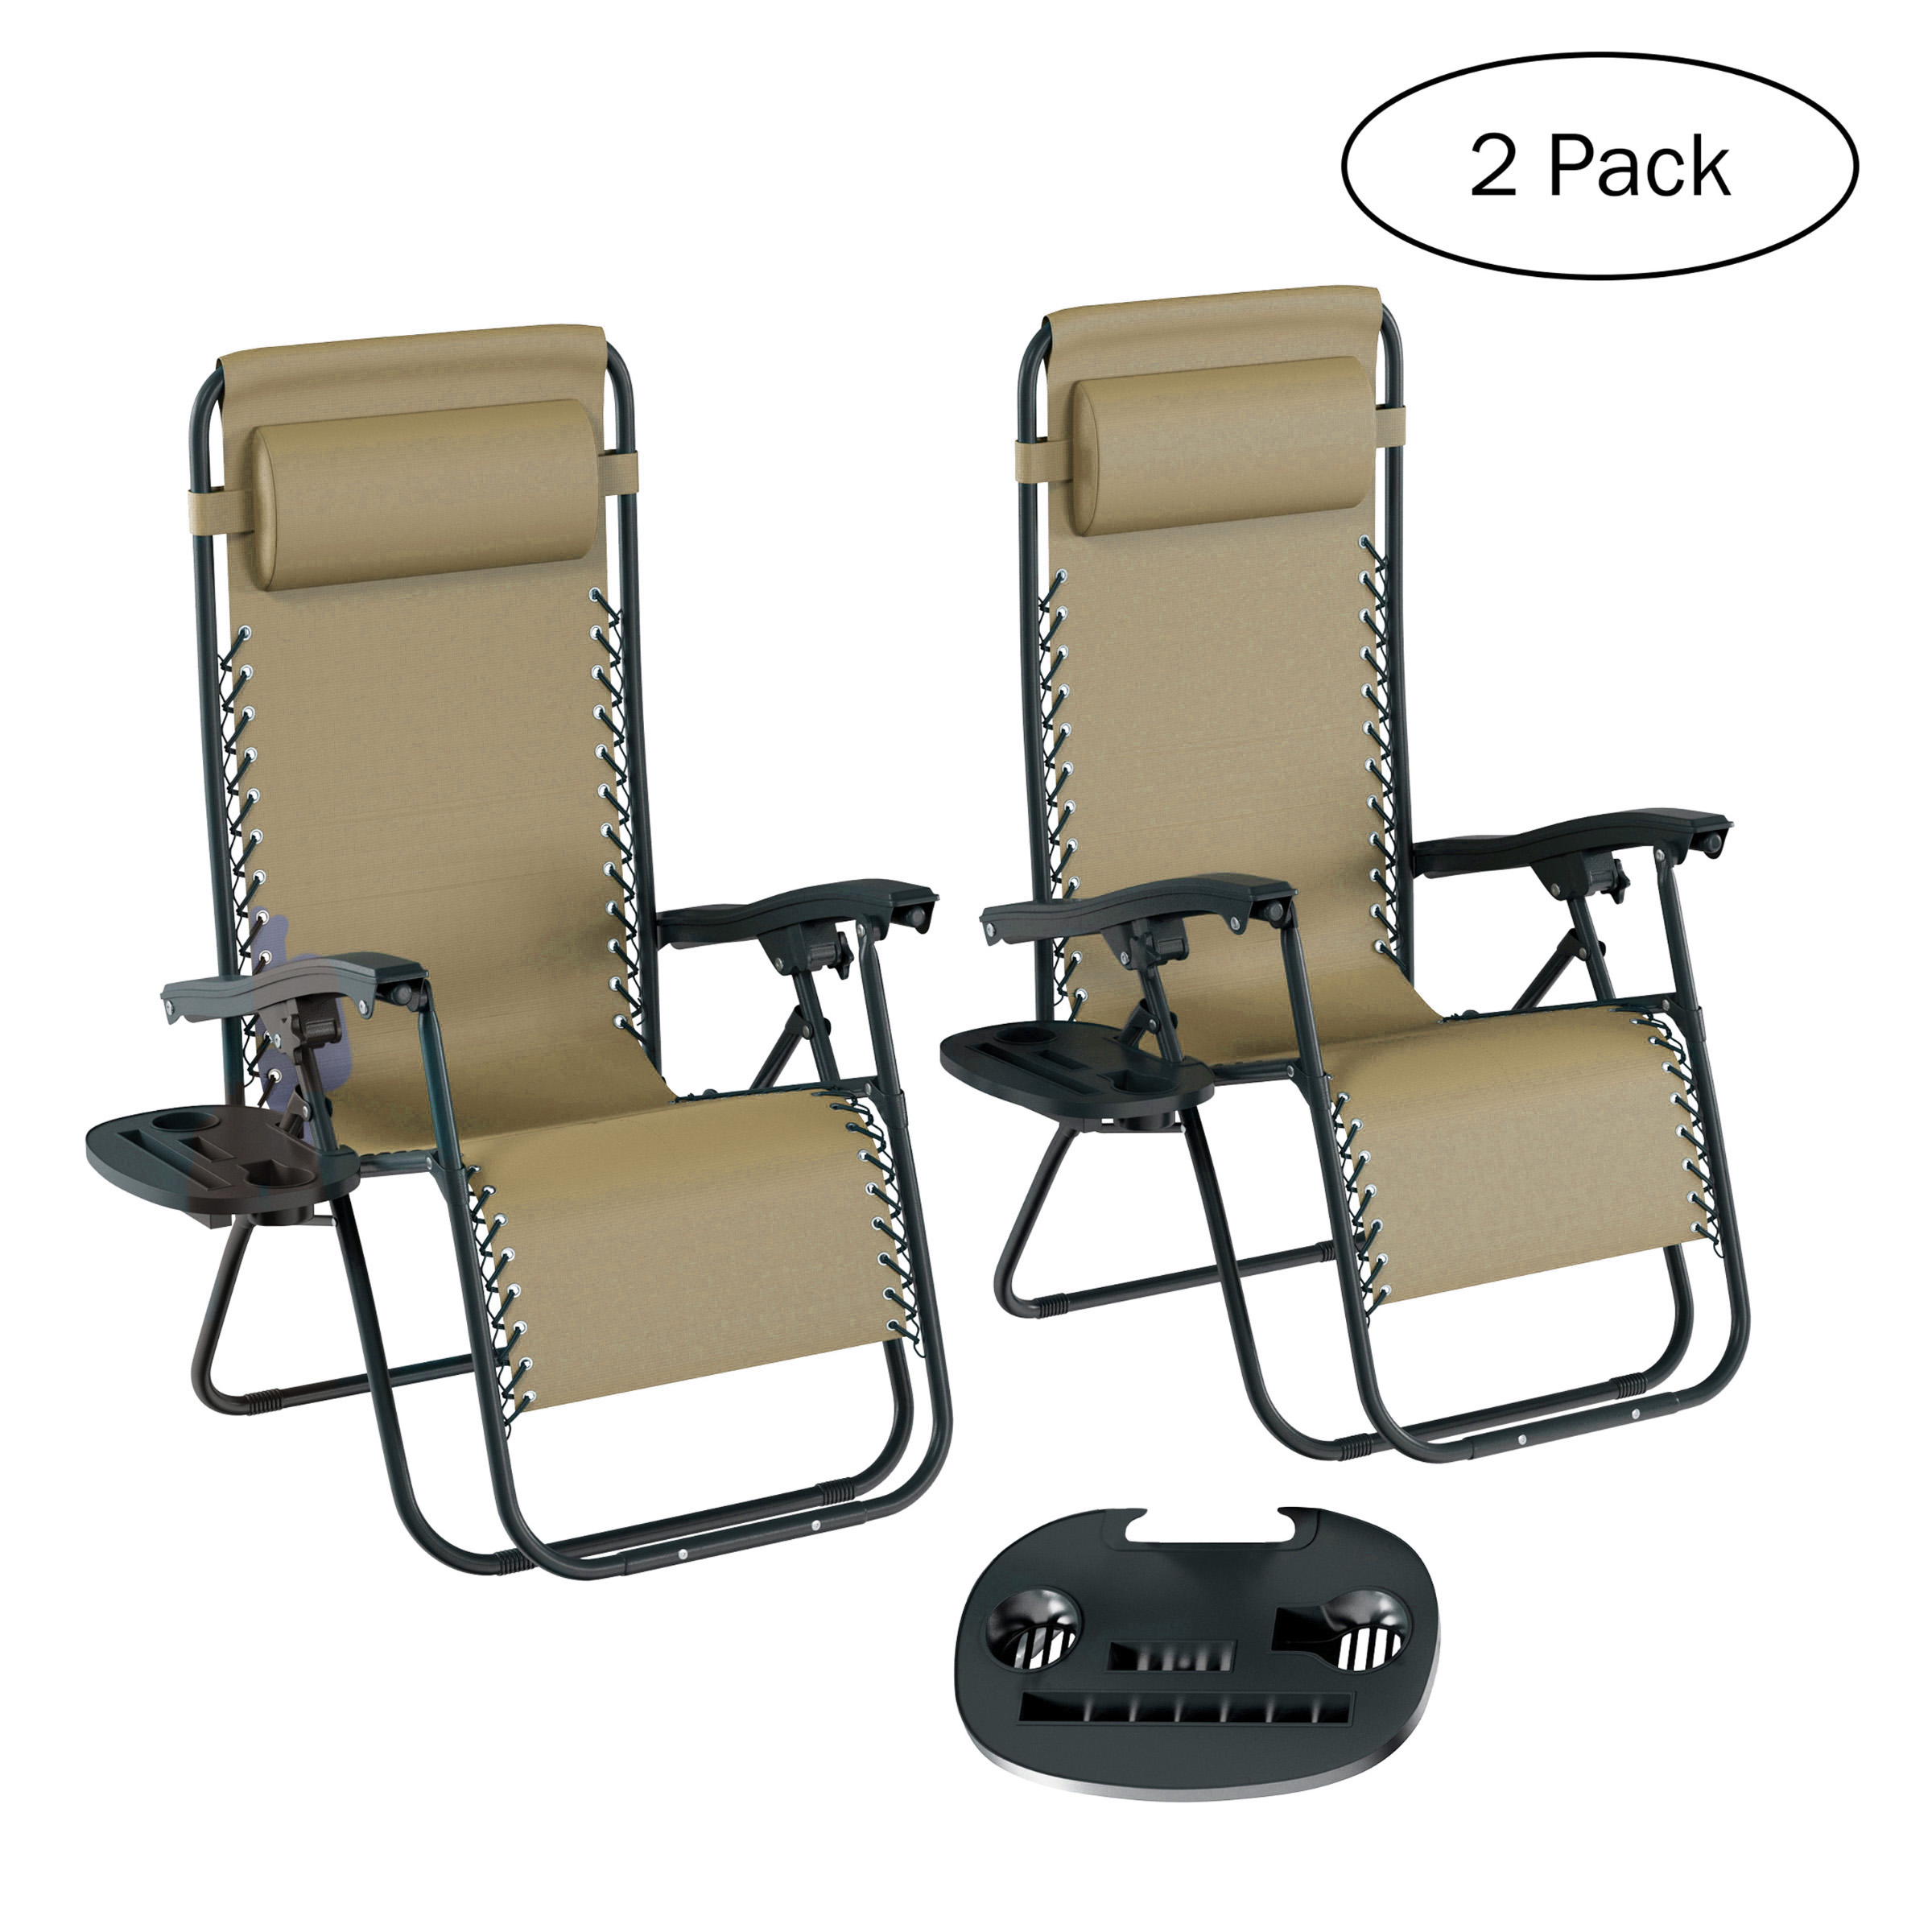 Zero Gravity Chairs ? Patio Furniture Set of 2 ? Folding Anti-Gravity Recliners with Side Table Cup Holder and Chair Pillow by Lavish Home (Beige) - image 1 of 8